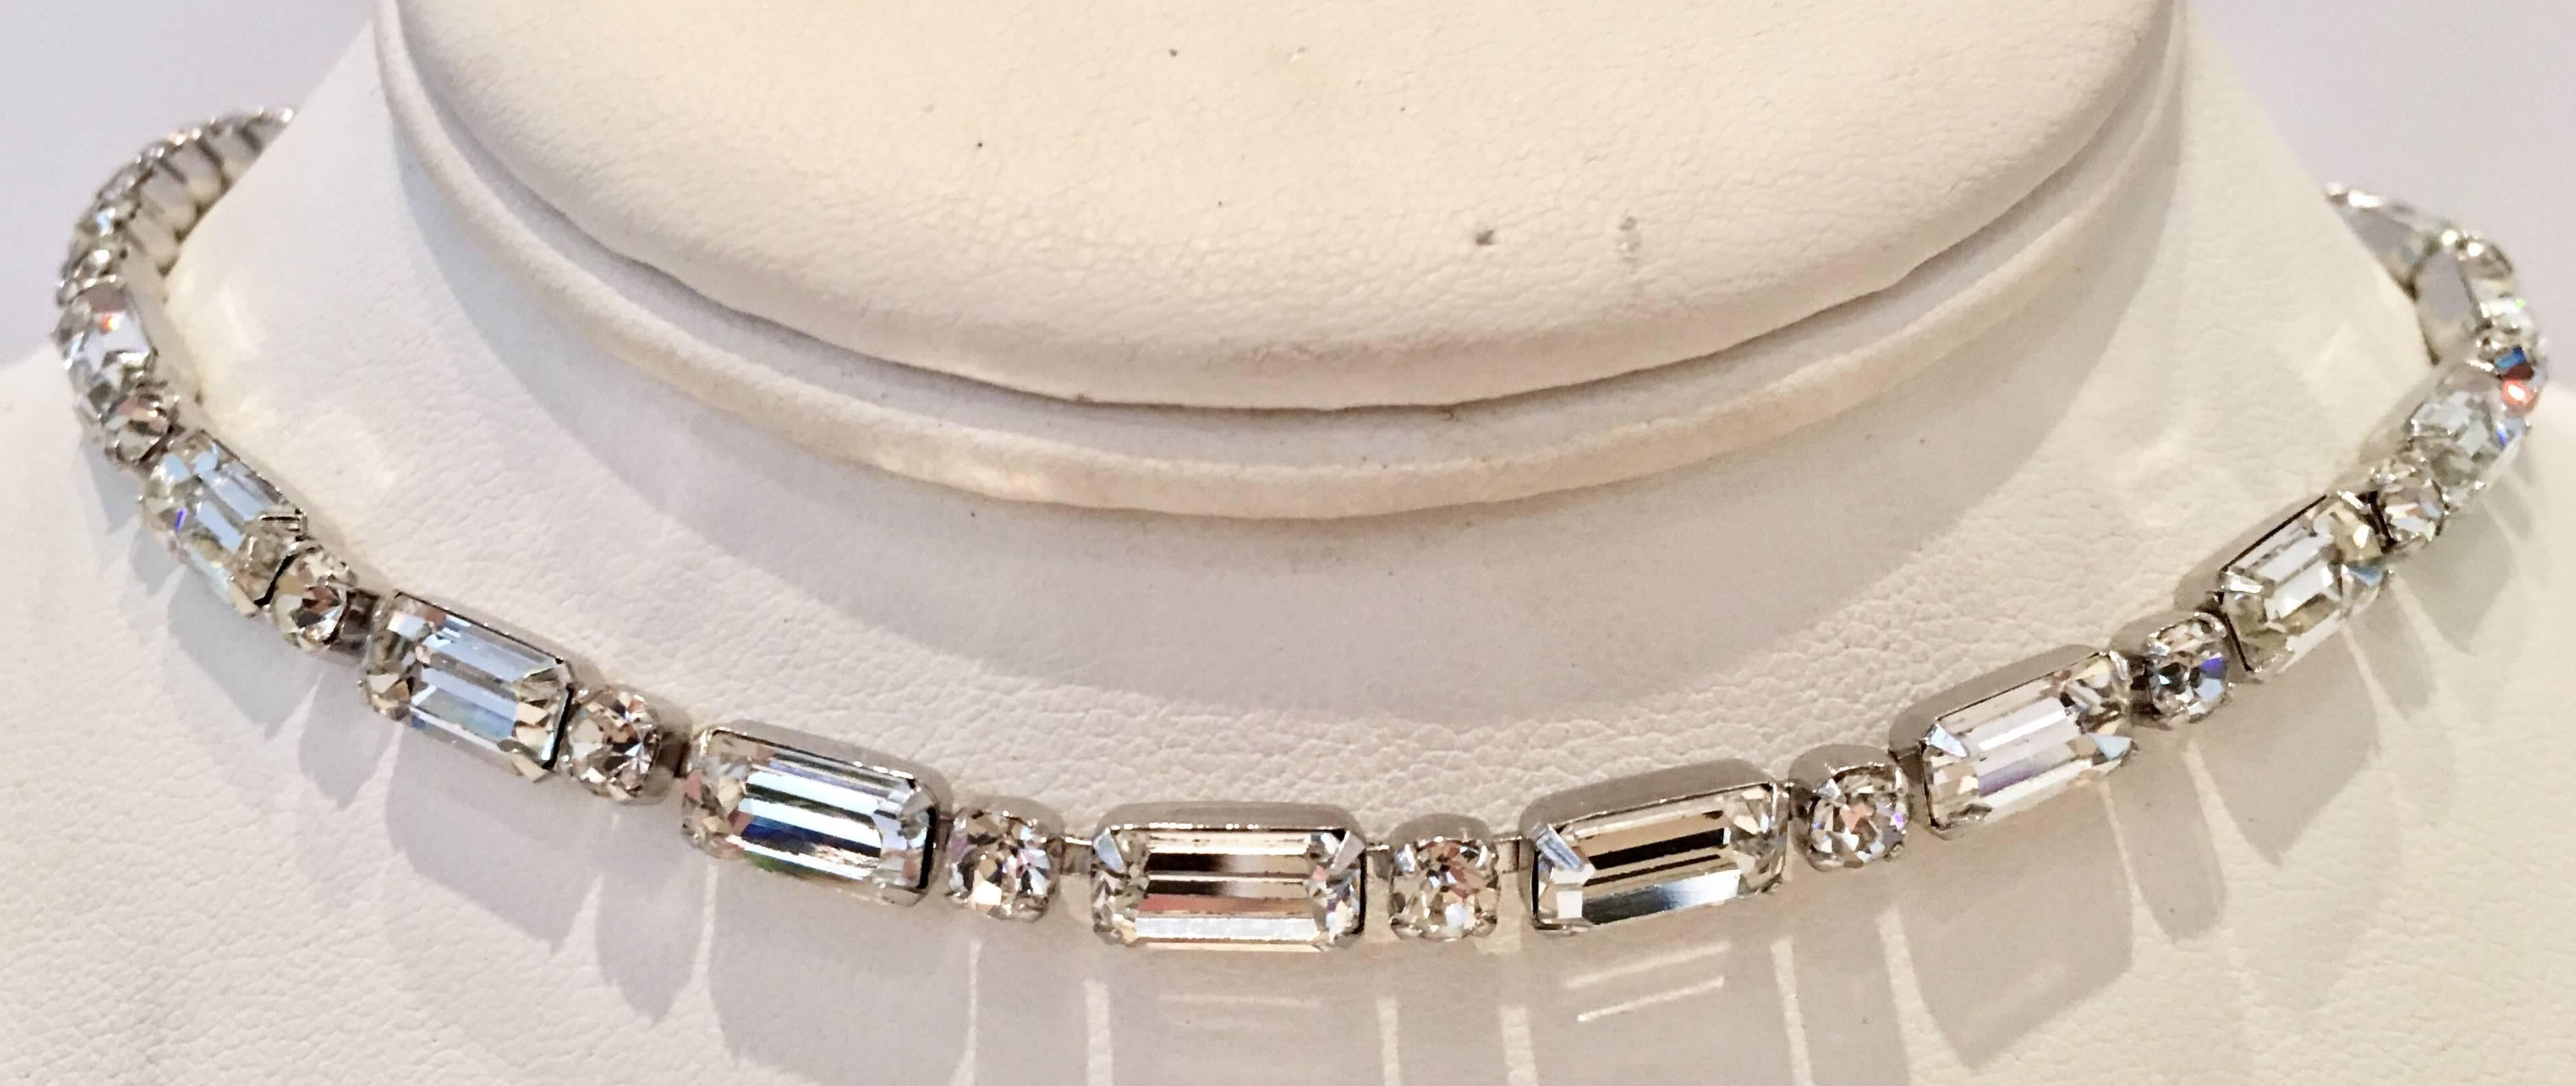 Classic & Brilliant Swarovski Crystal Clear Cut & Faceted Rhinestone Choker Necklace By, Weiss. This brilliant crystal cut baguette and round stone necklace is set in silver rhodium plate non tarnish metal and features a jeweled hook adjustable